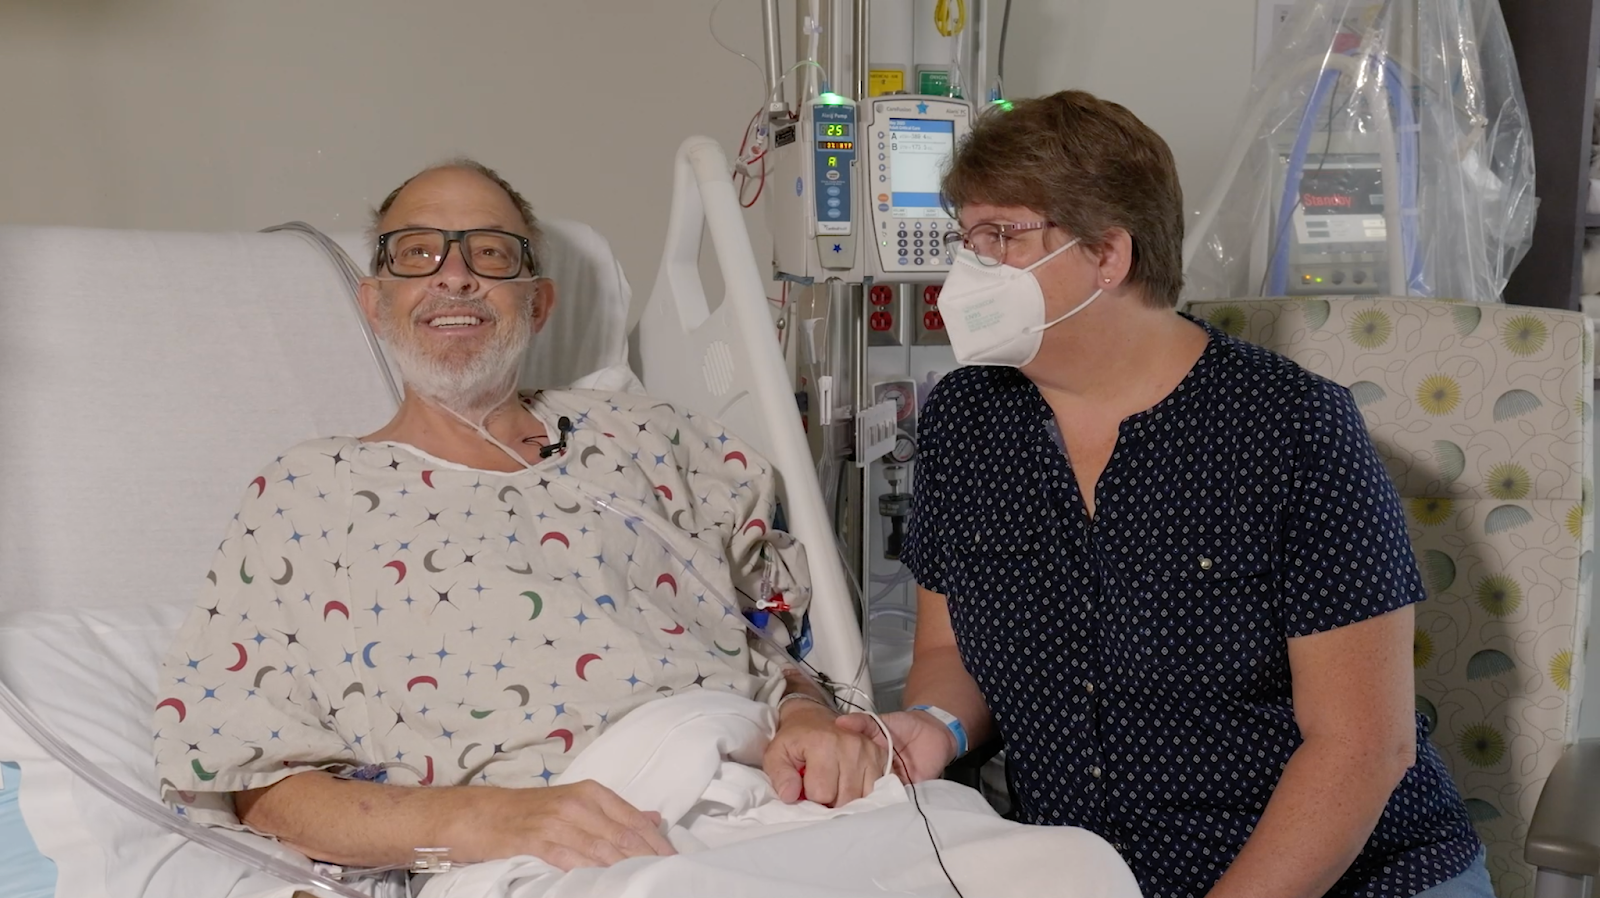 Lawrence Faucette and his wife Ann in the hospital several days before the surgery